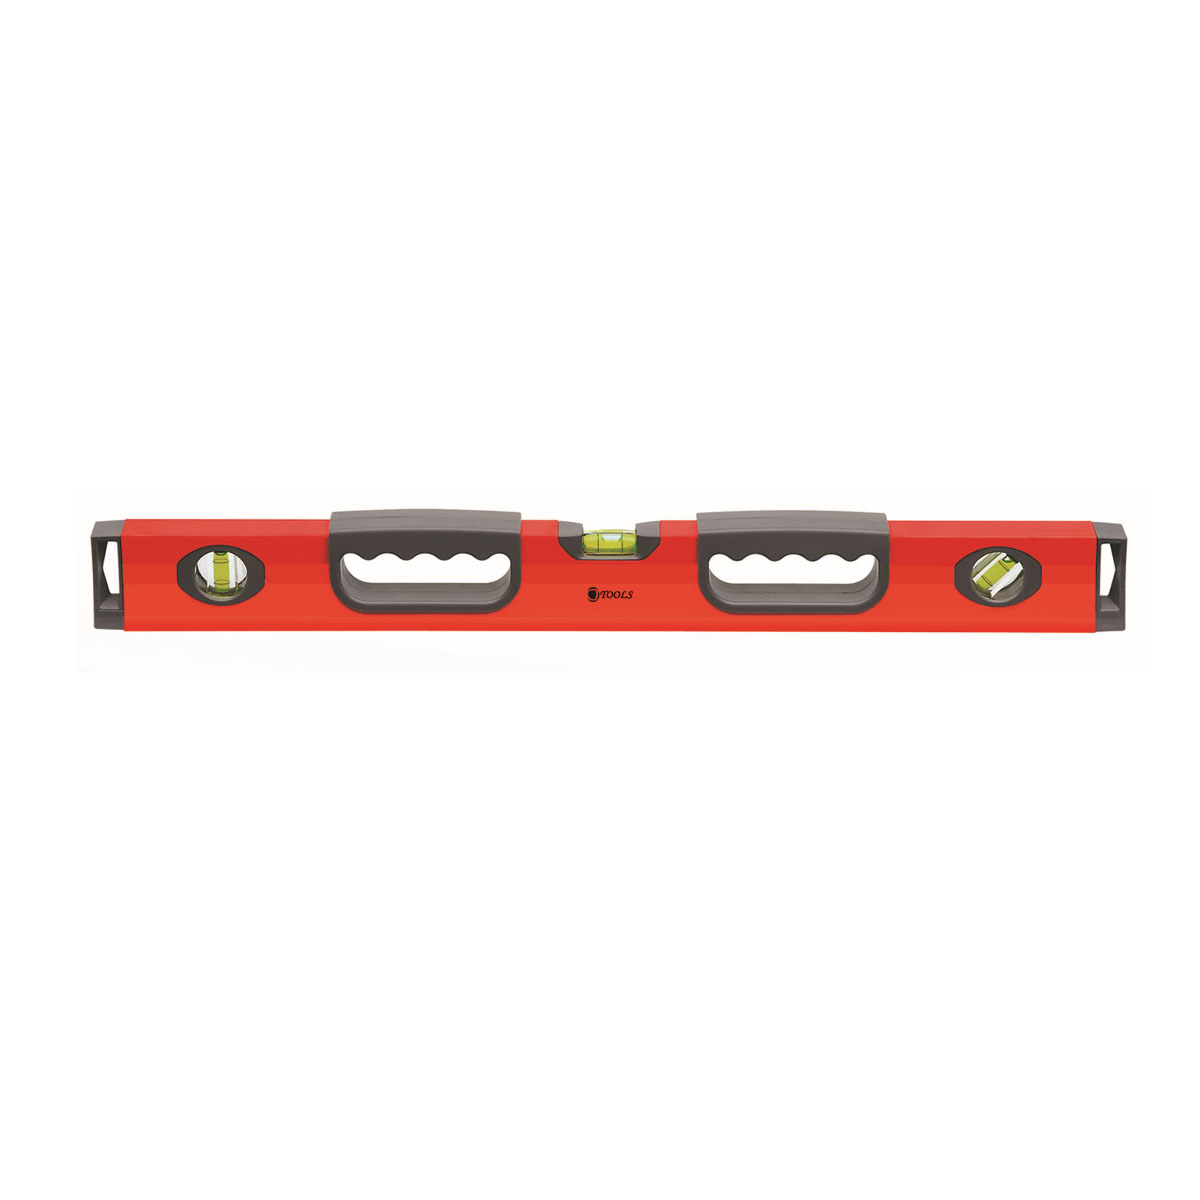 China Factory for High Accuracy Spirit Level -
 Box Level LT-2401C – Longtai